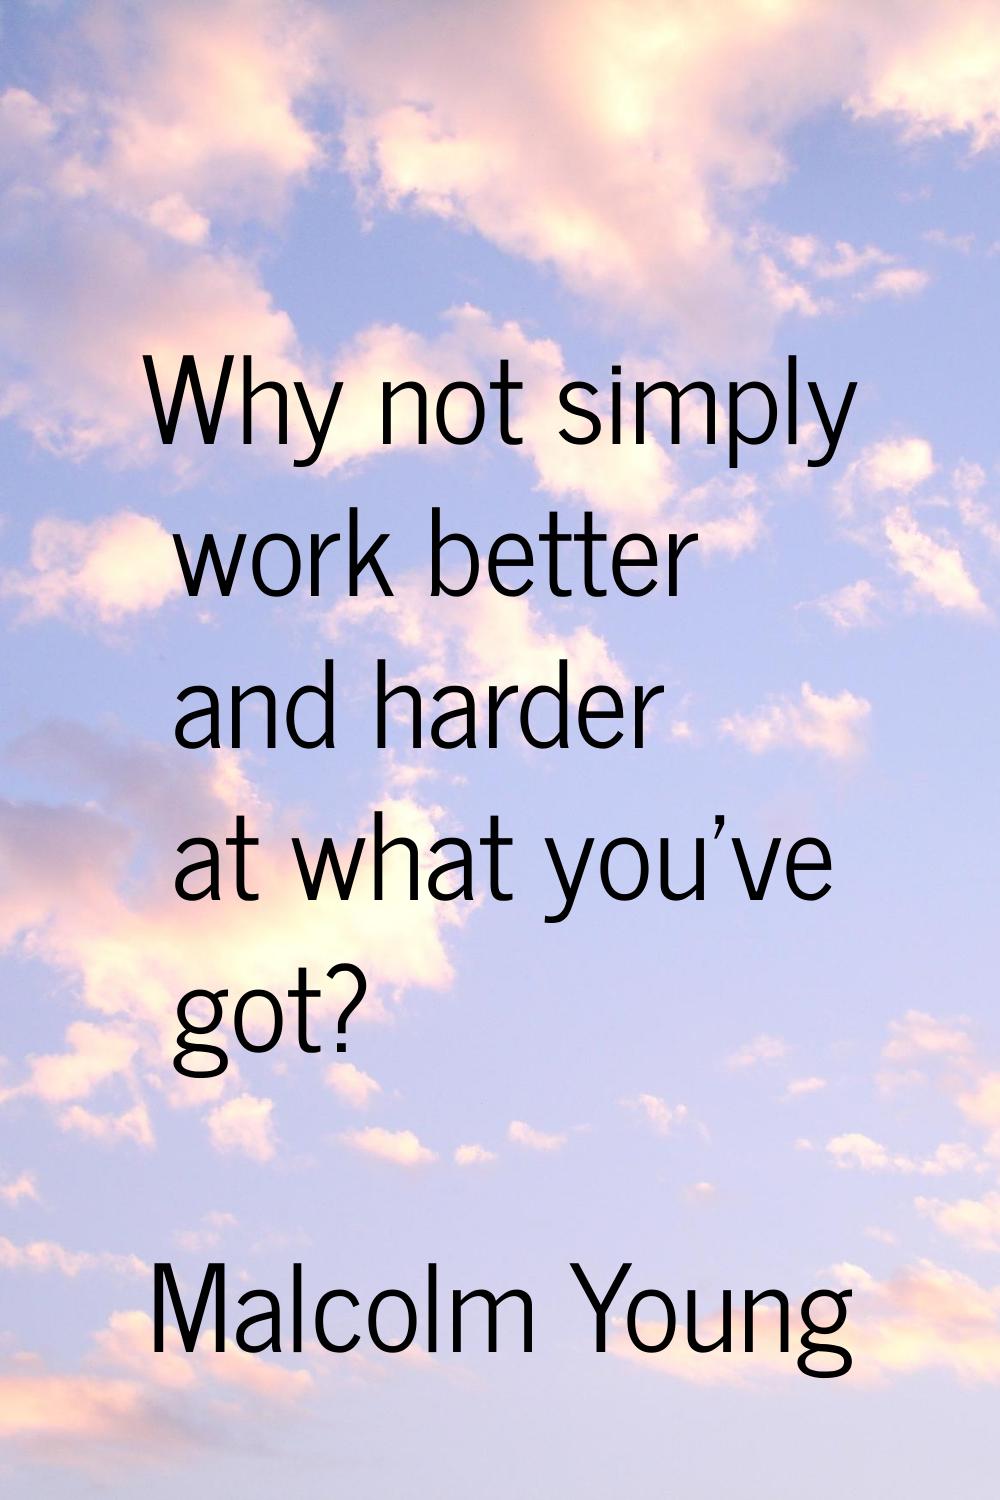 Why not simply work better and harder at what you've got?